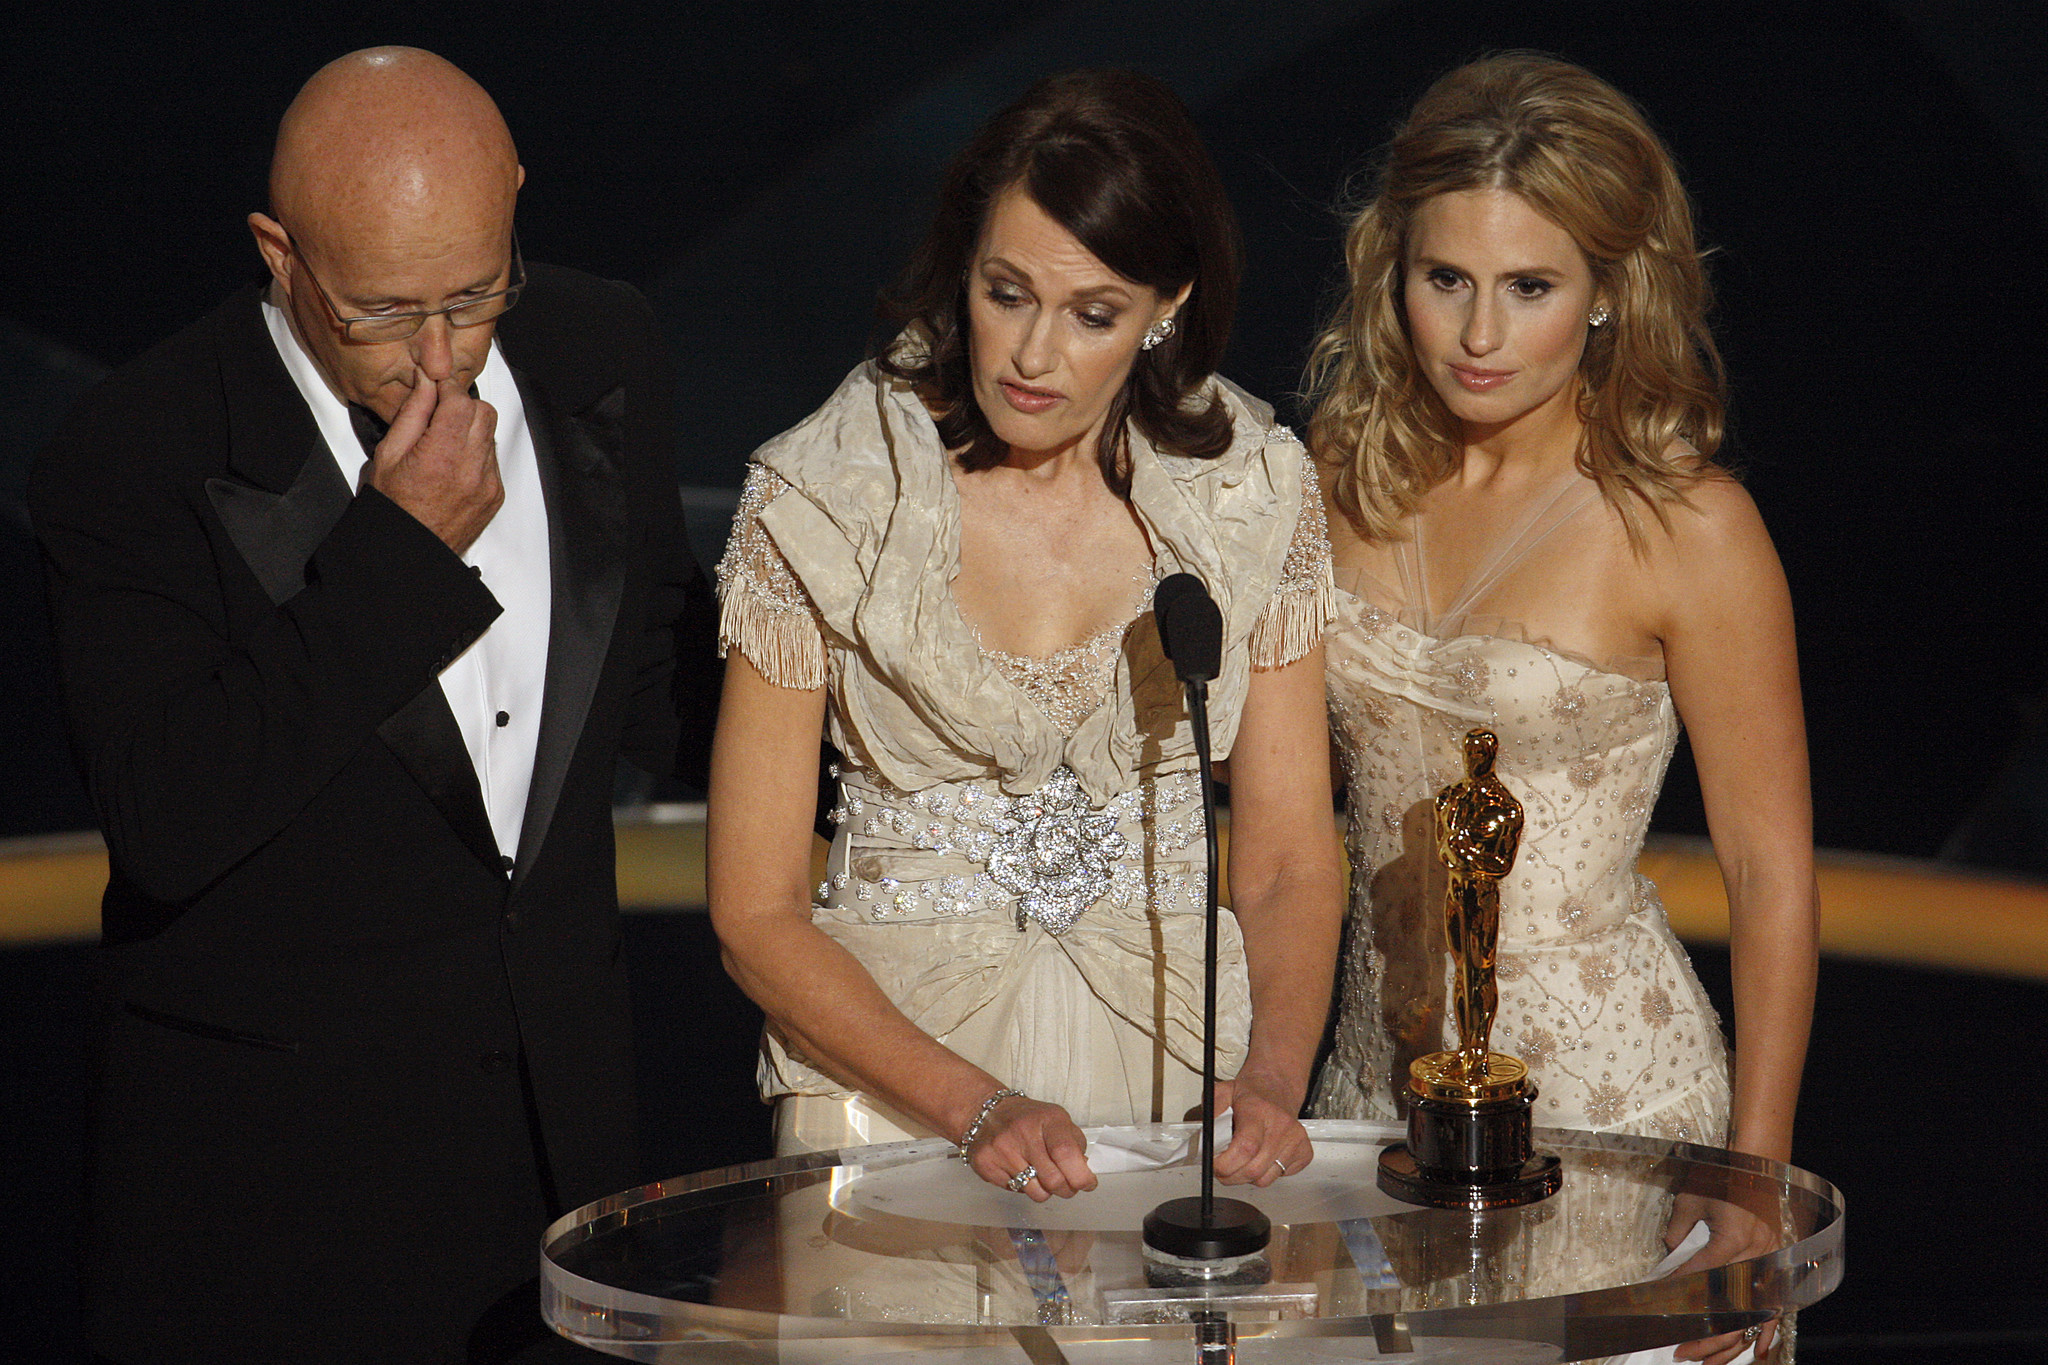 Accepting the supporting actor Oscar given posthumously to Heath Ledger, from right, Ledger's sister Kate, mother Sally Bell and father Kim at the 81st Annual Academy Awards on February 22, 2009.